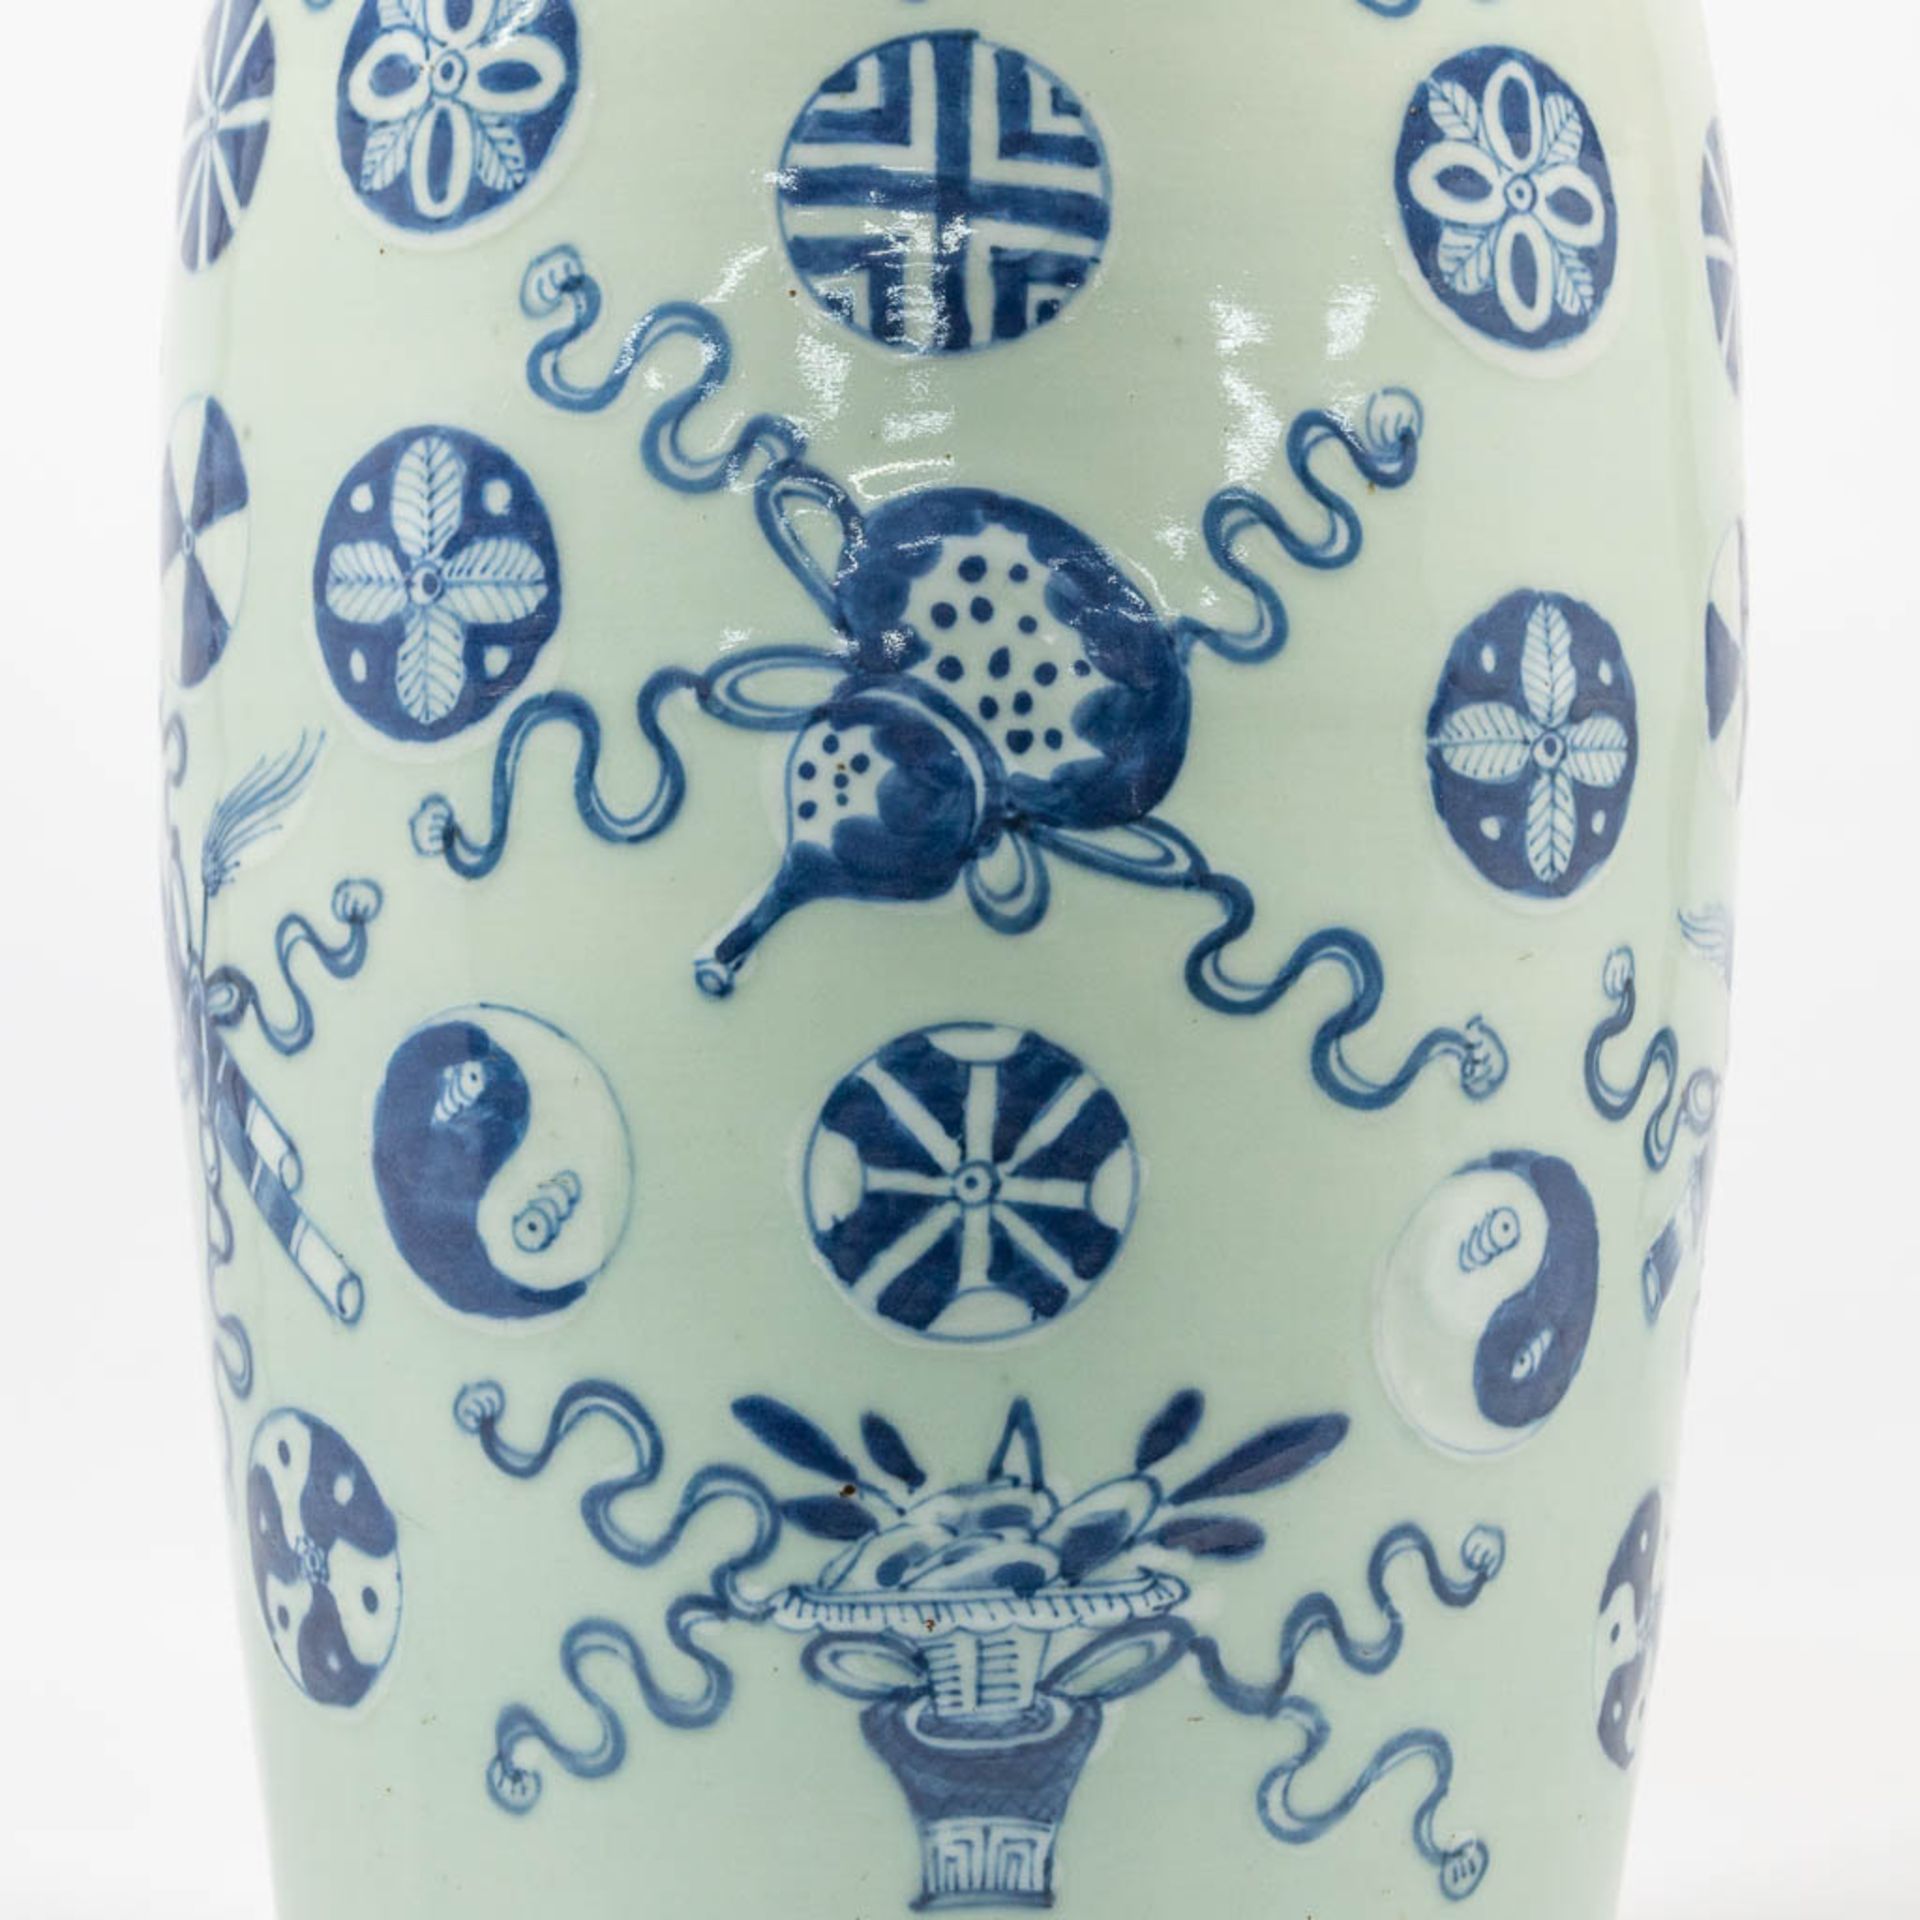 A blue and white Chinese Vase with symbolic decor, combined with 2 blue and white porcelain plates. - Image 19 of 33